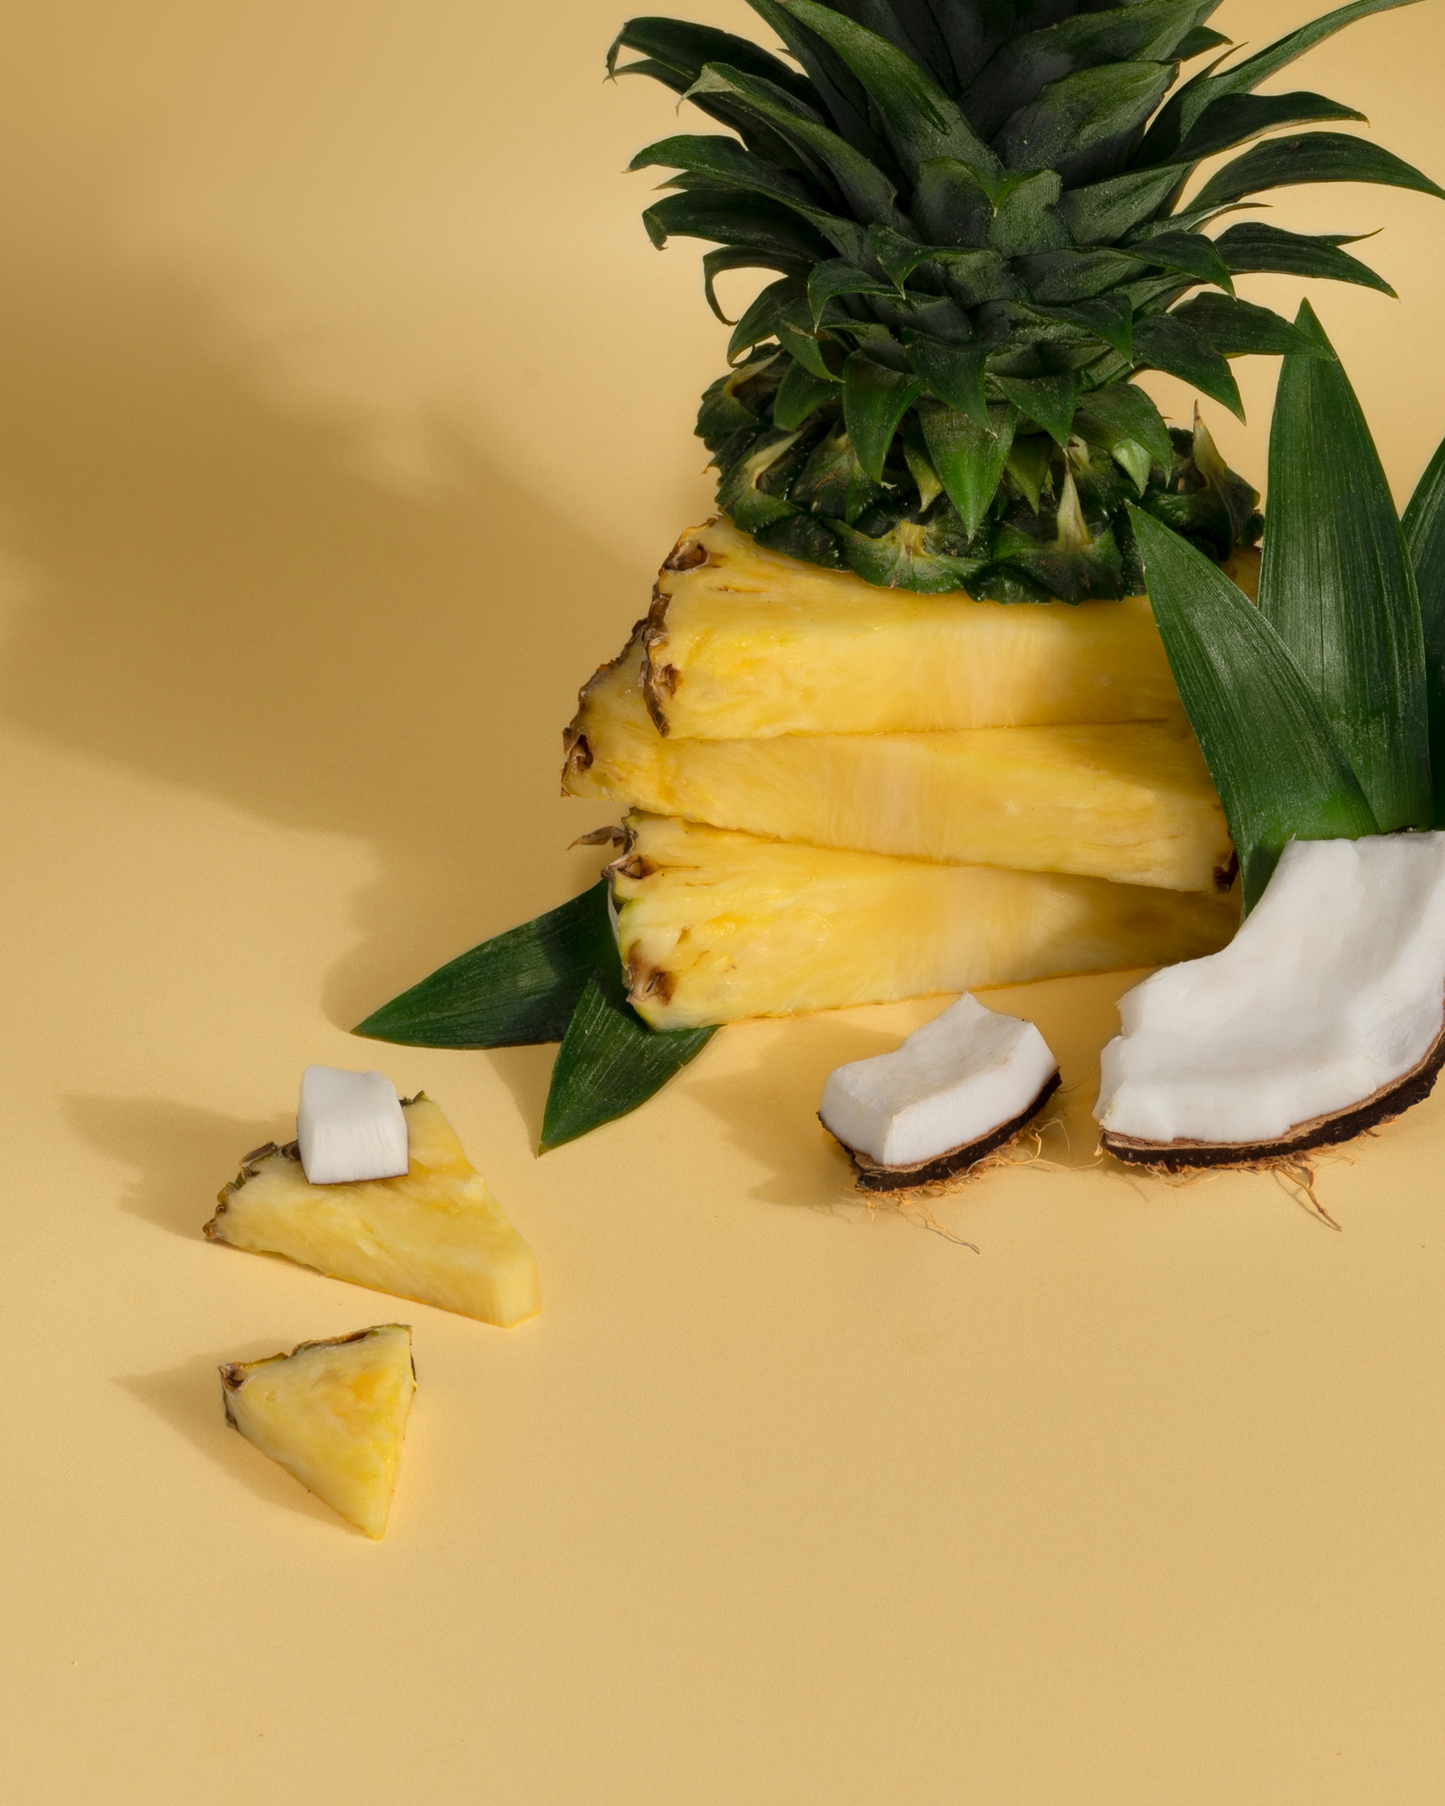 Pineapple & Coconut scent cues